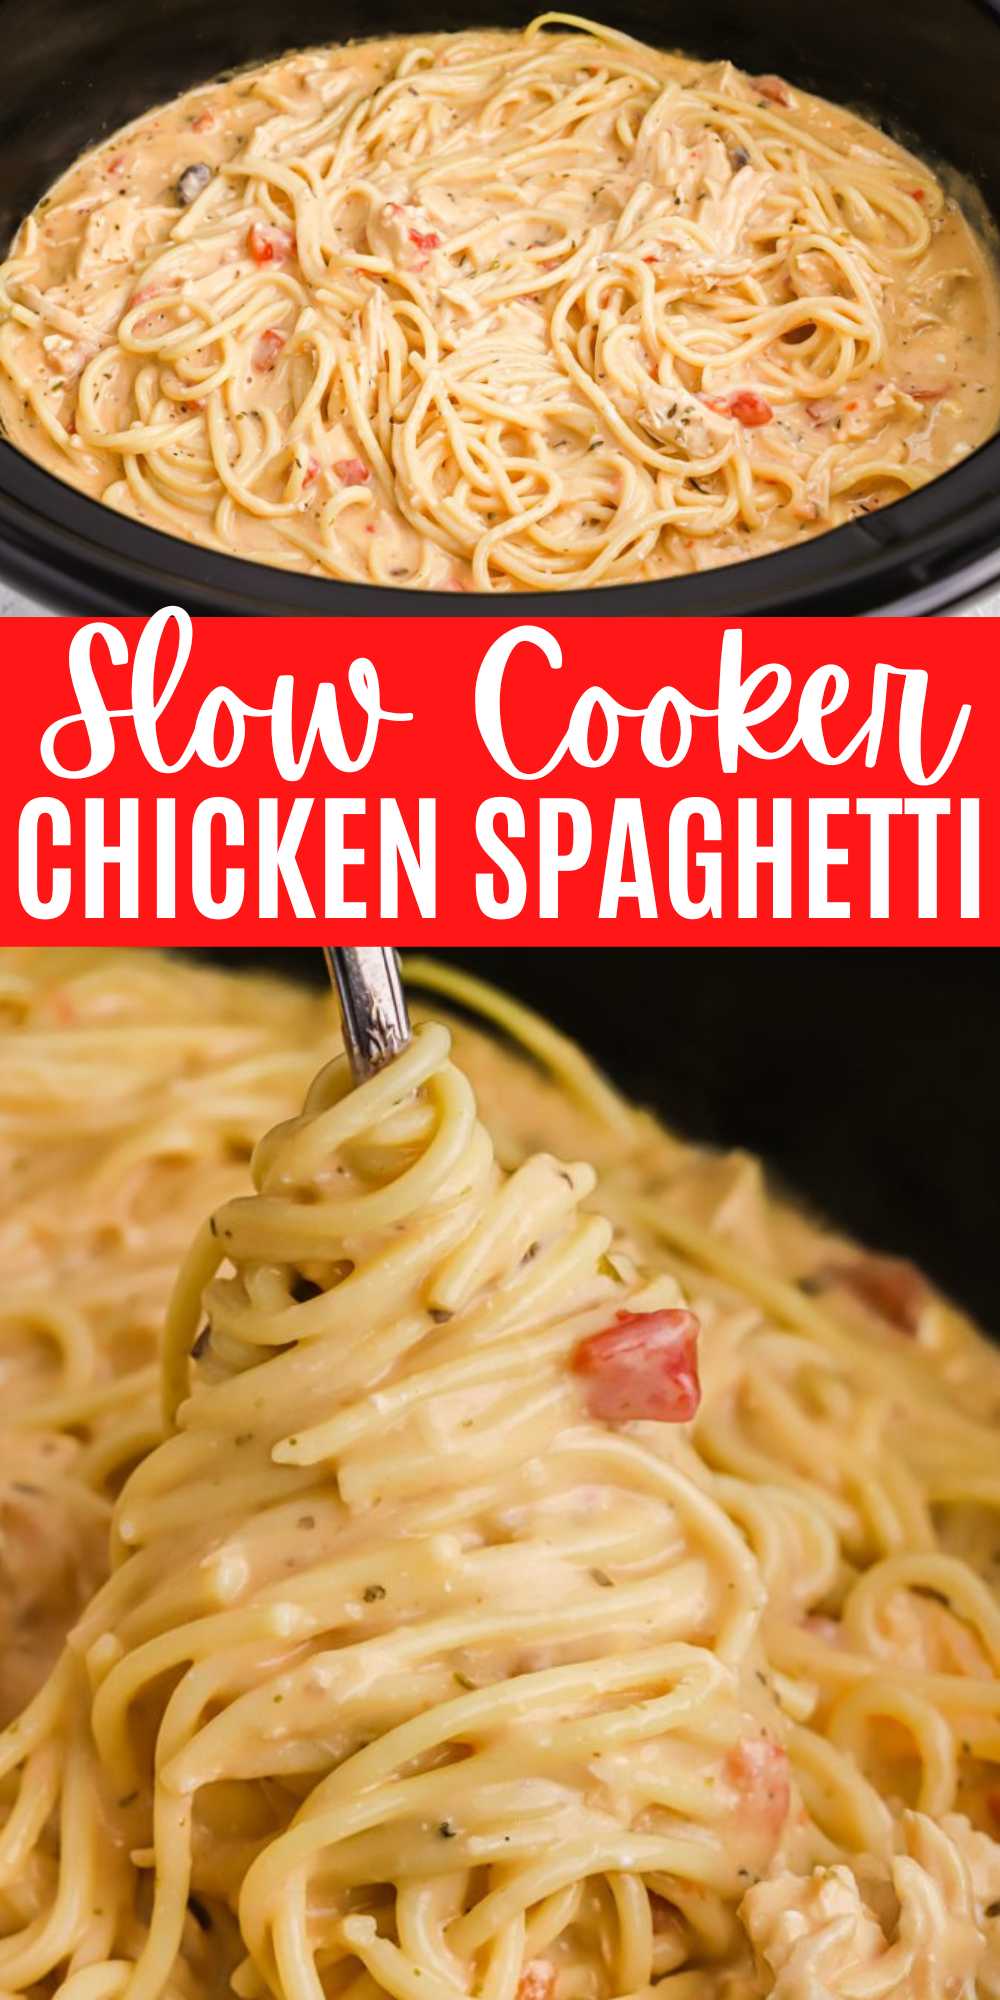 Crockpot Cheesy Chicken Spaghetti Recipe is a delicious twist on traditional spaghetti. . Your family will ask for this over and over. It is so easy to prepare that you can quickly throw this together any day of the week. #eatingonadime #crockpotspaghetti #cheesychickenspaghetti